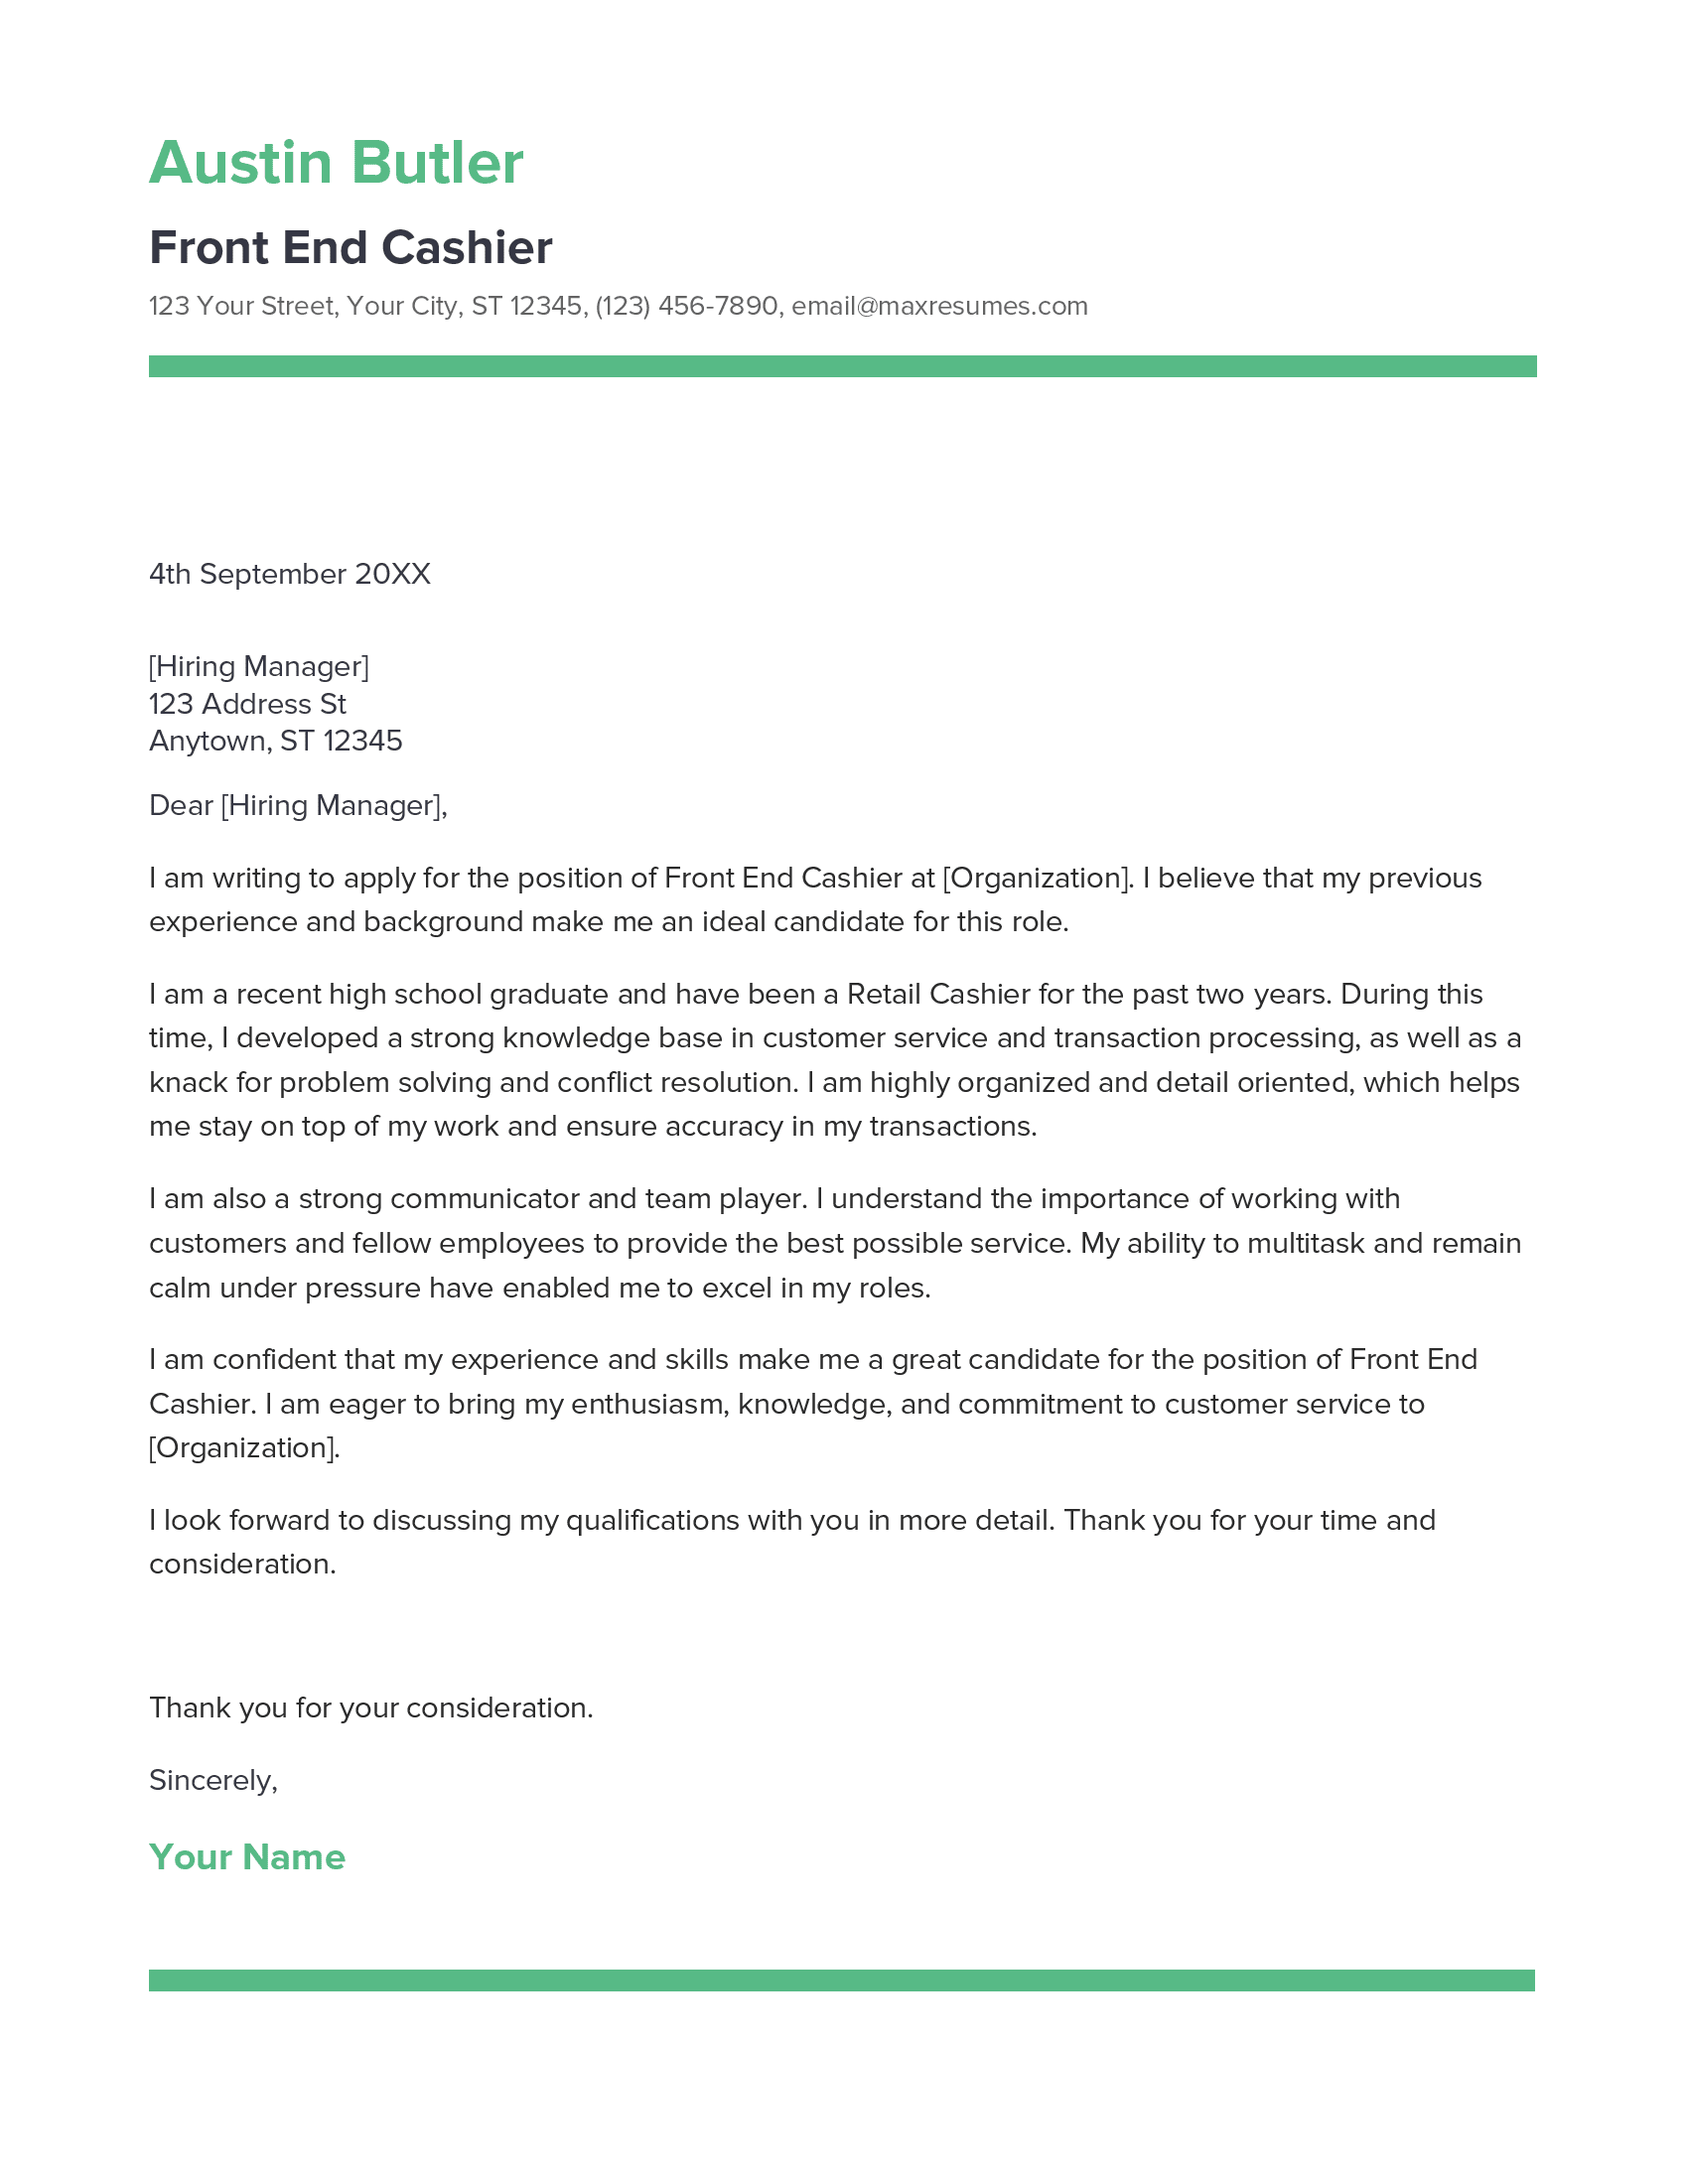 cover letter for front end cashier